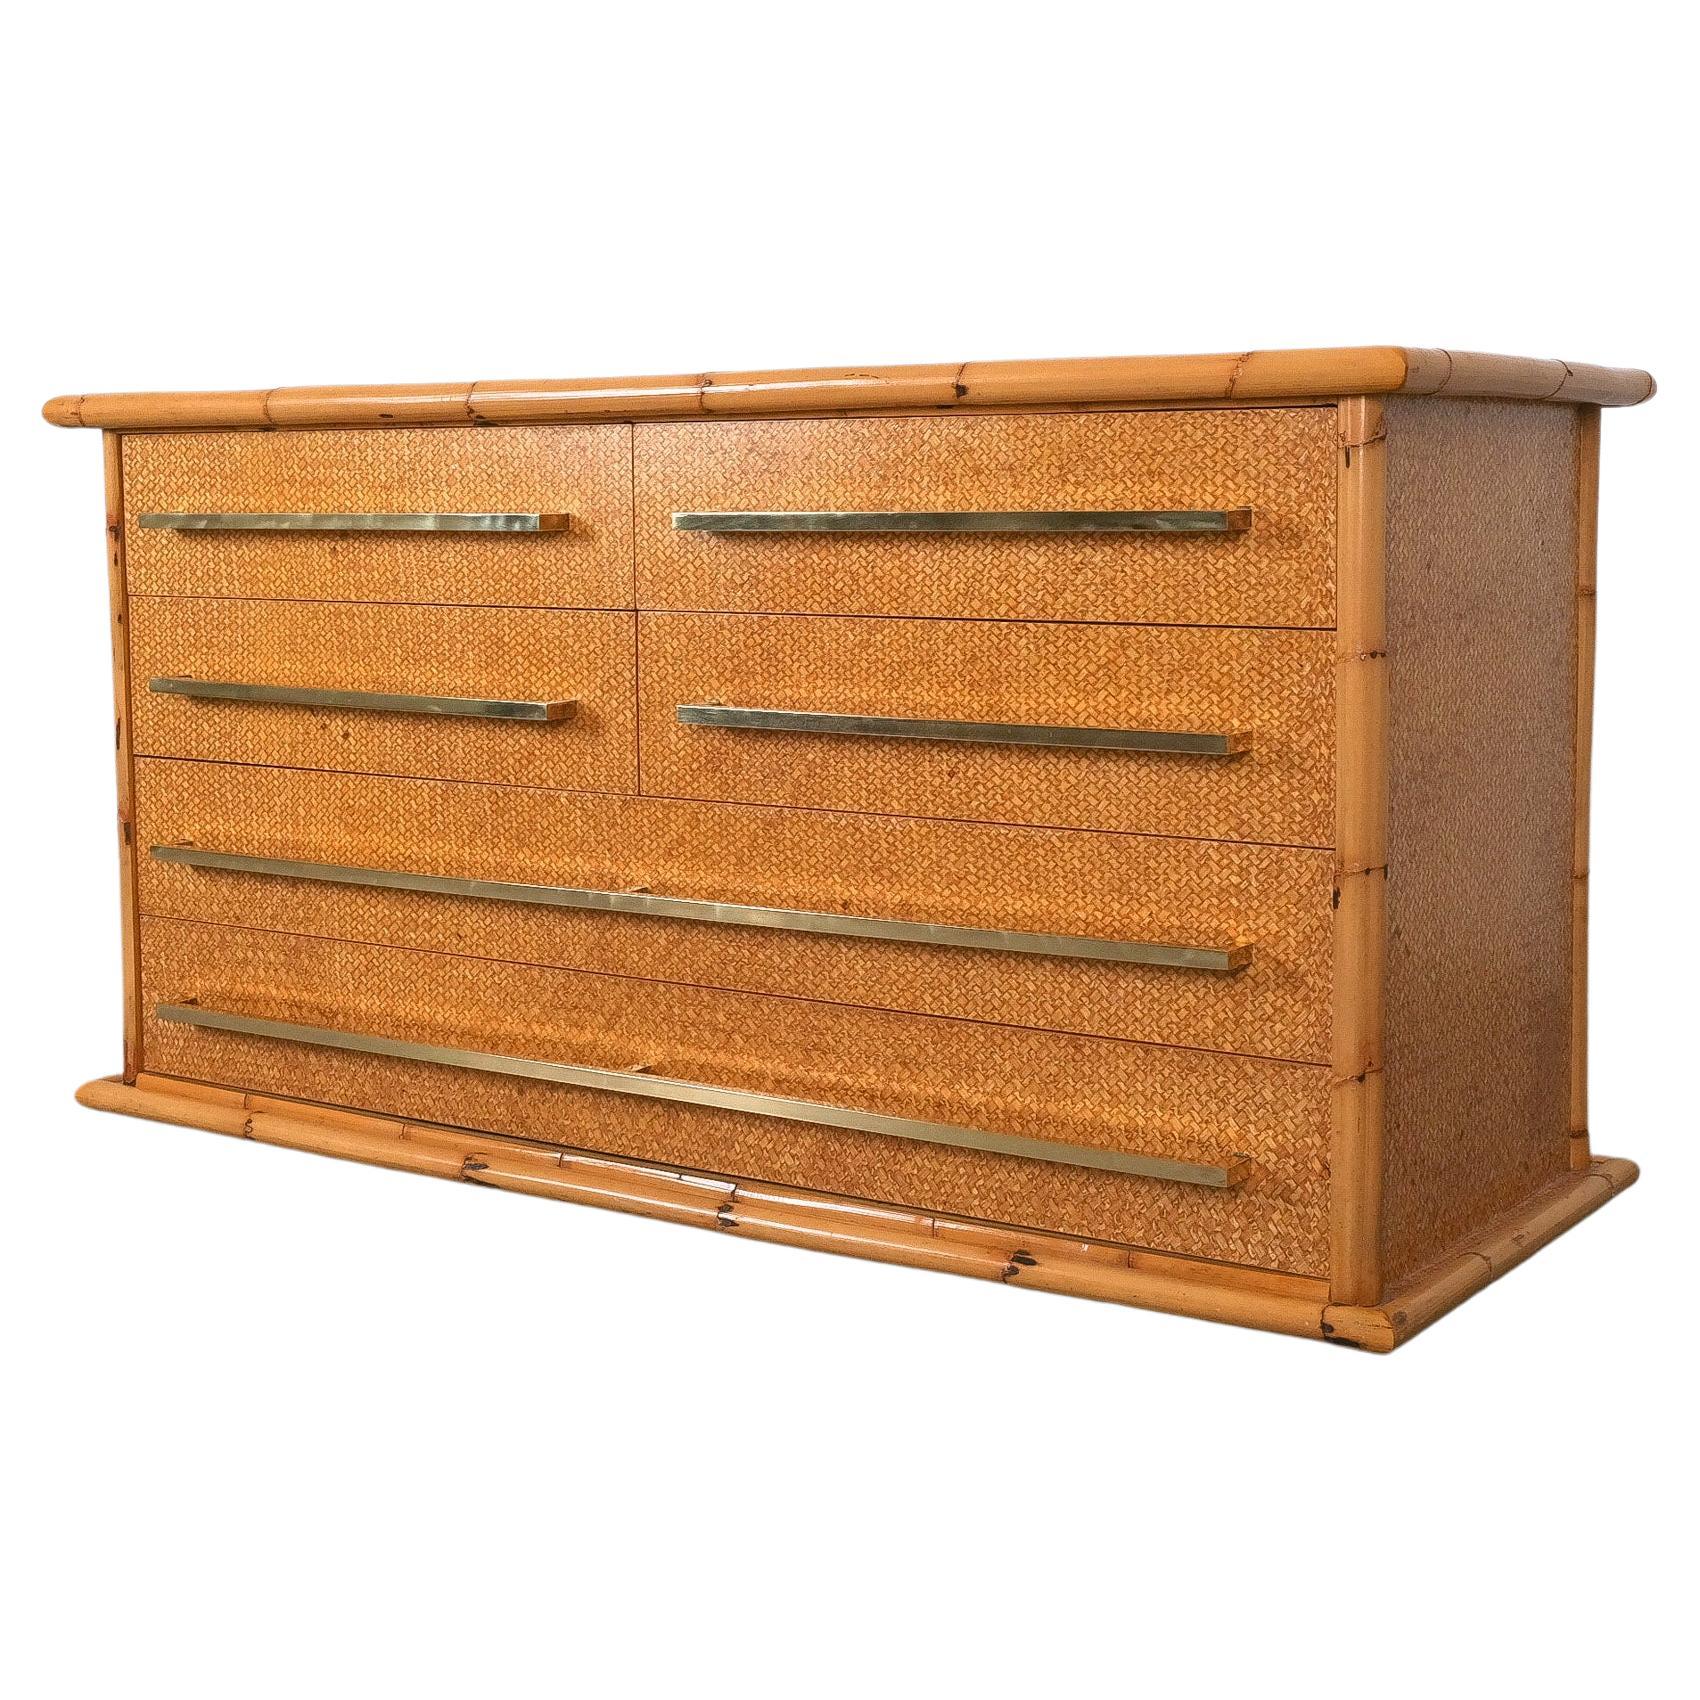 Bamboo Cane and Brass Commode Chest of Drawers by Vivai del Sud, Italy, 1975 For Sale